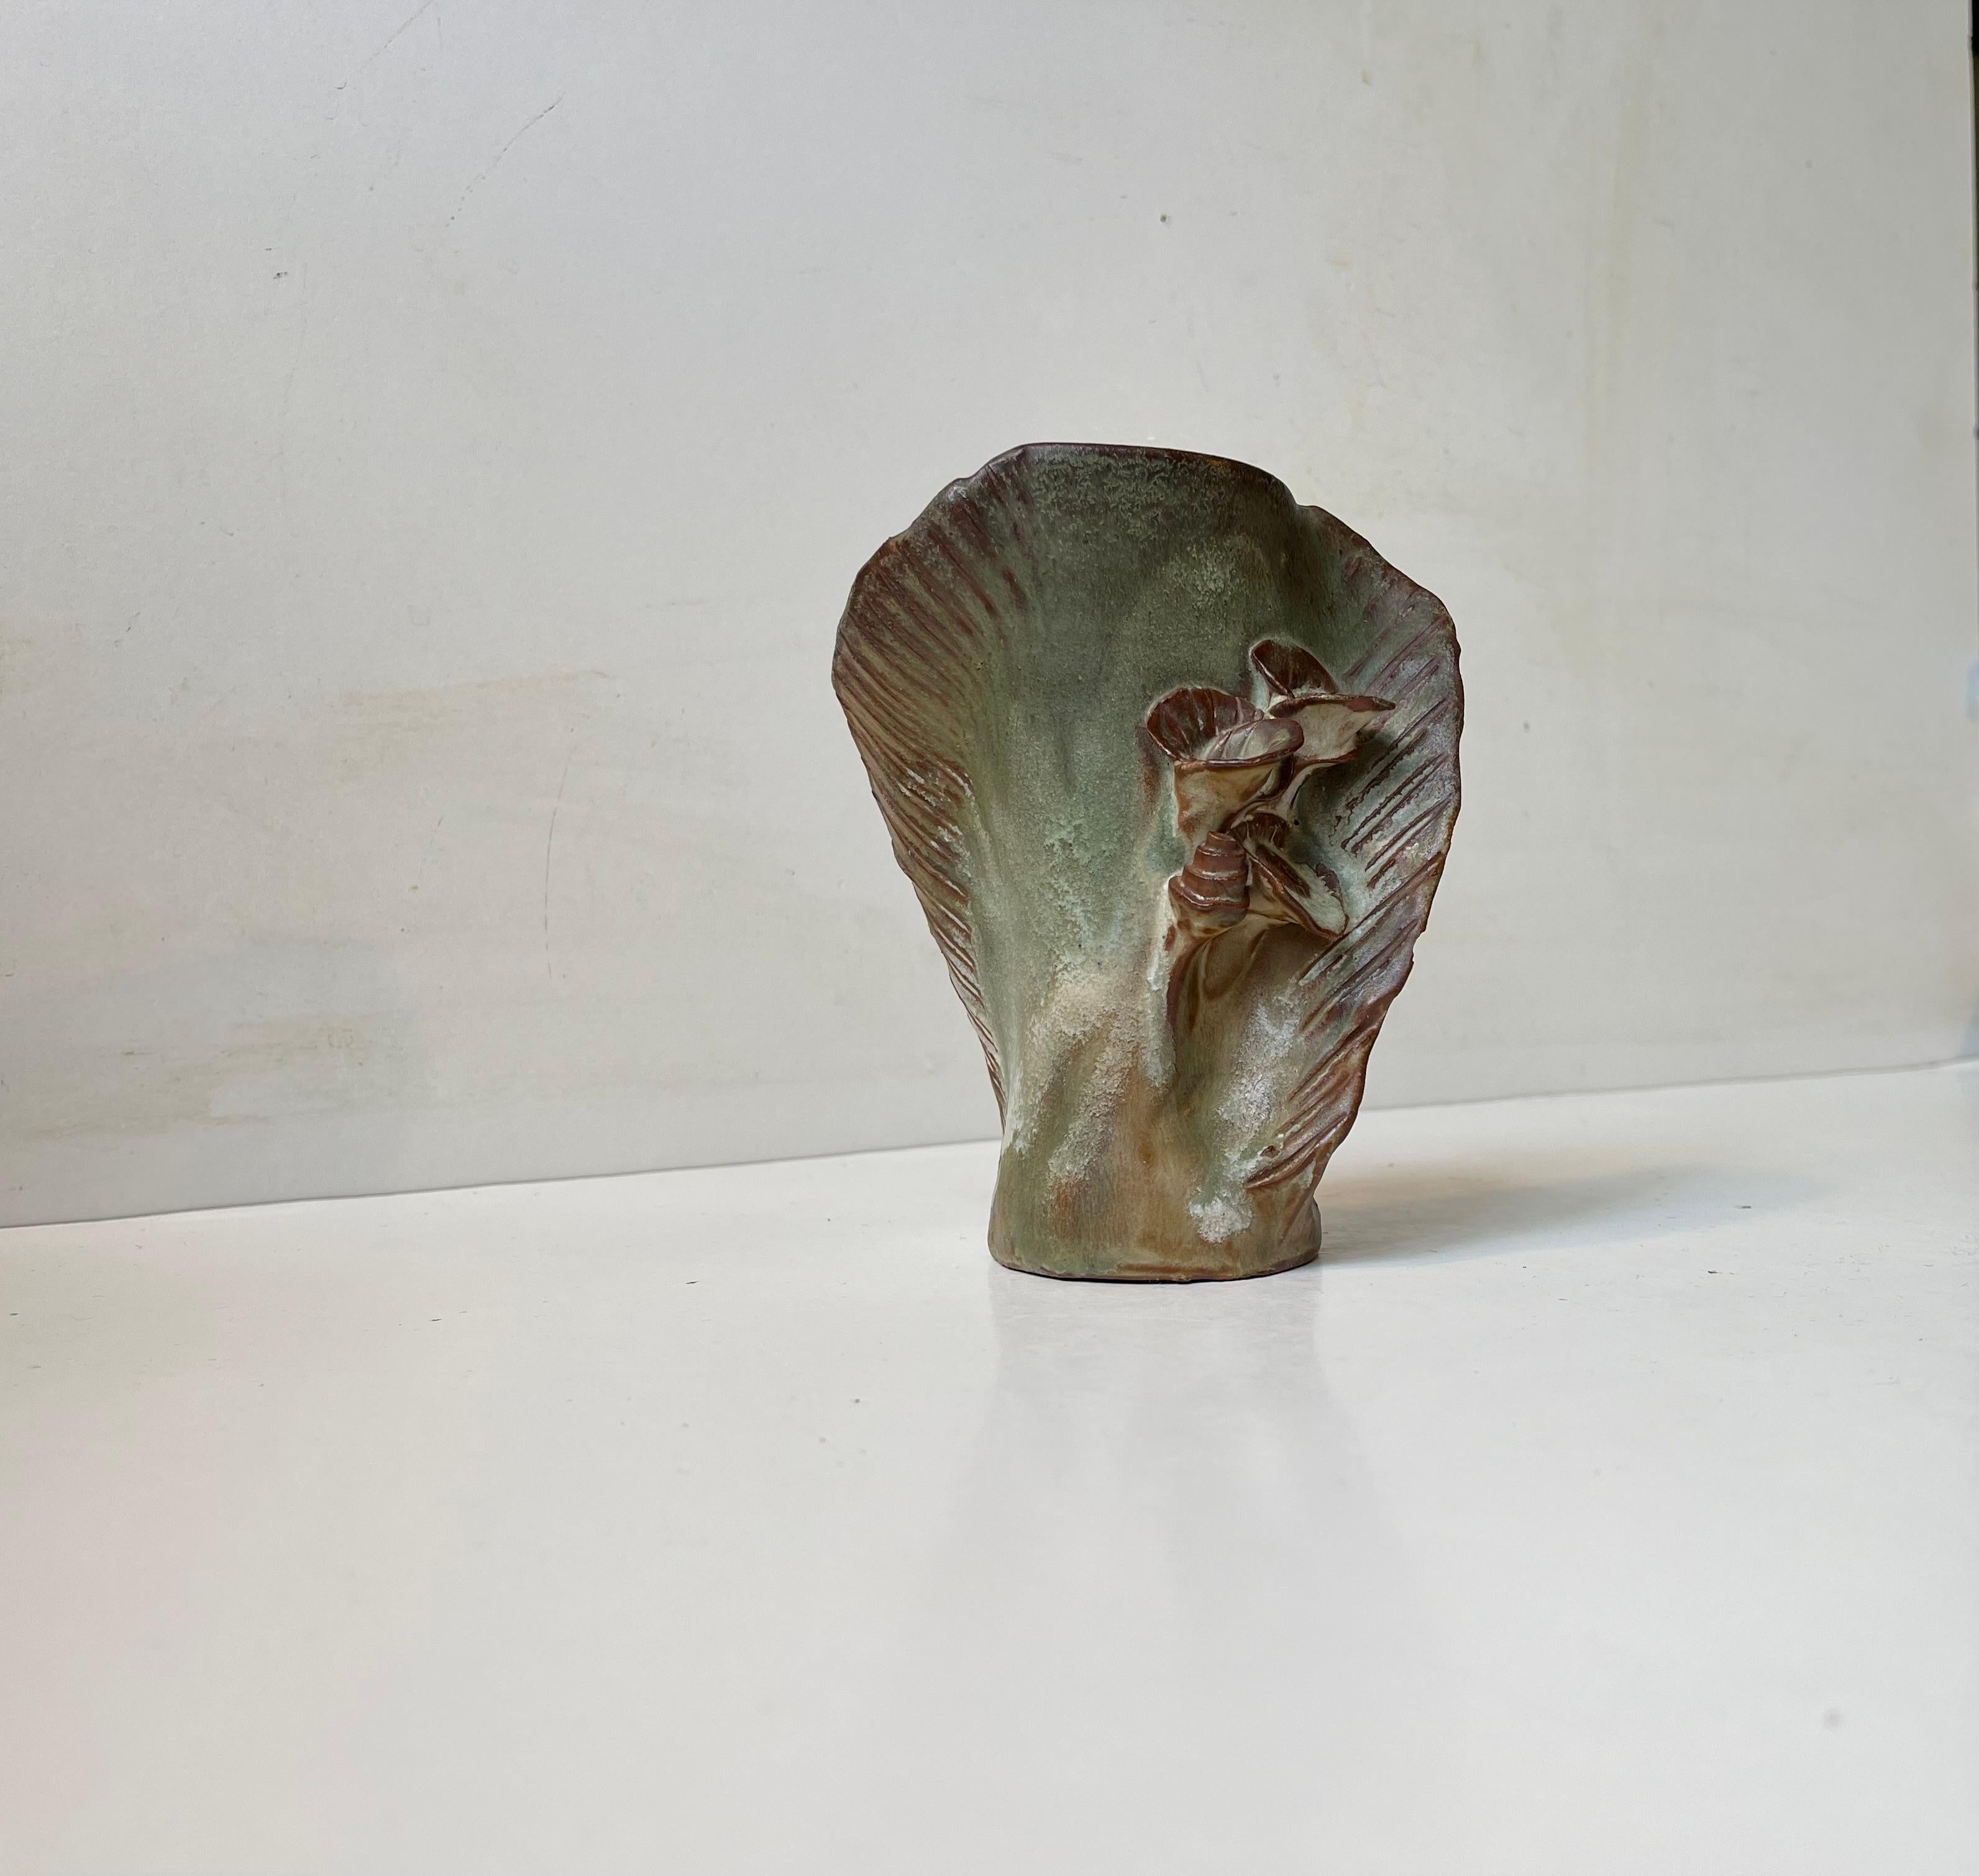 Kristofle Handmade biomorphic vase in the style of Arne bang. Floral dekoration upon a cobra shaped body in earthy green and brown glazes. Signed to its side by the Scandinavian artist. Measurements: H: 15 cm W: 12/11 cm, Dept: 8 cm.